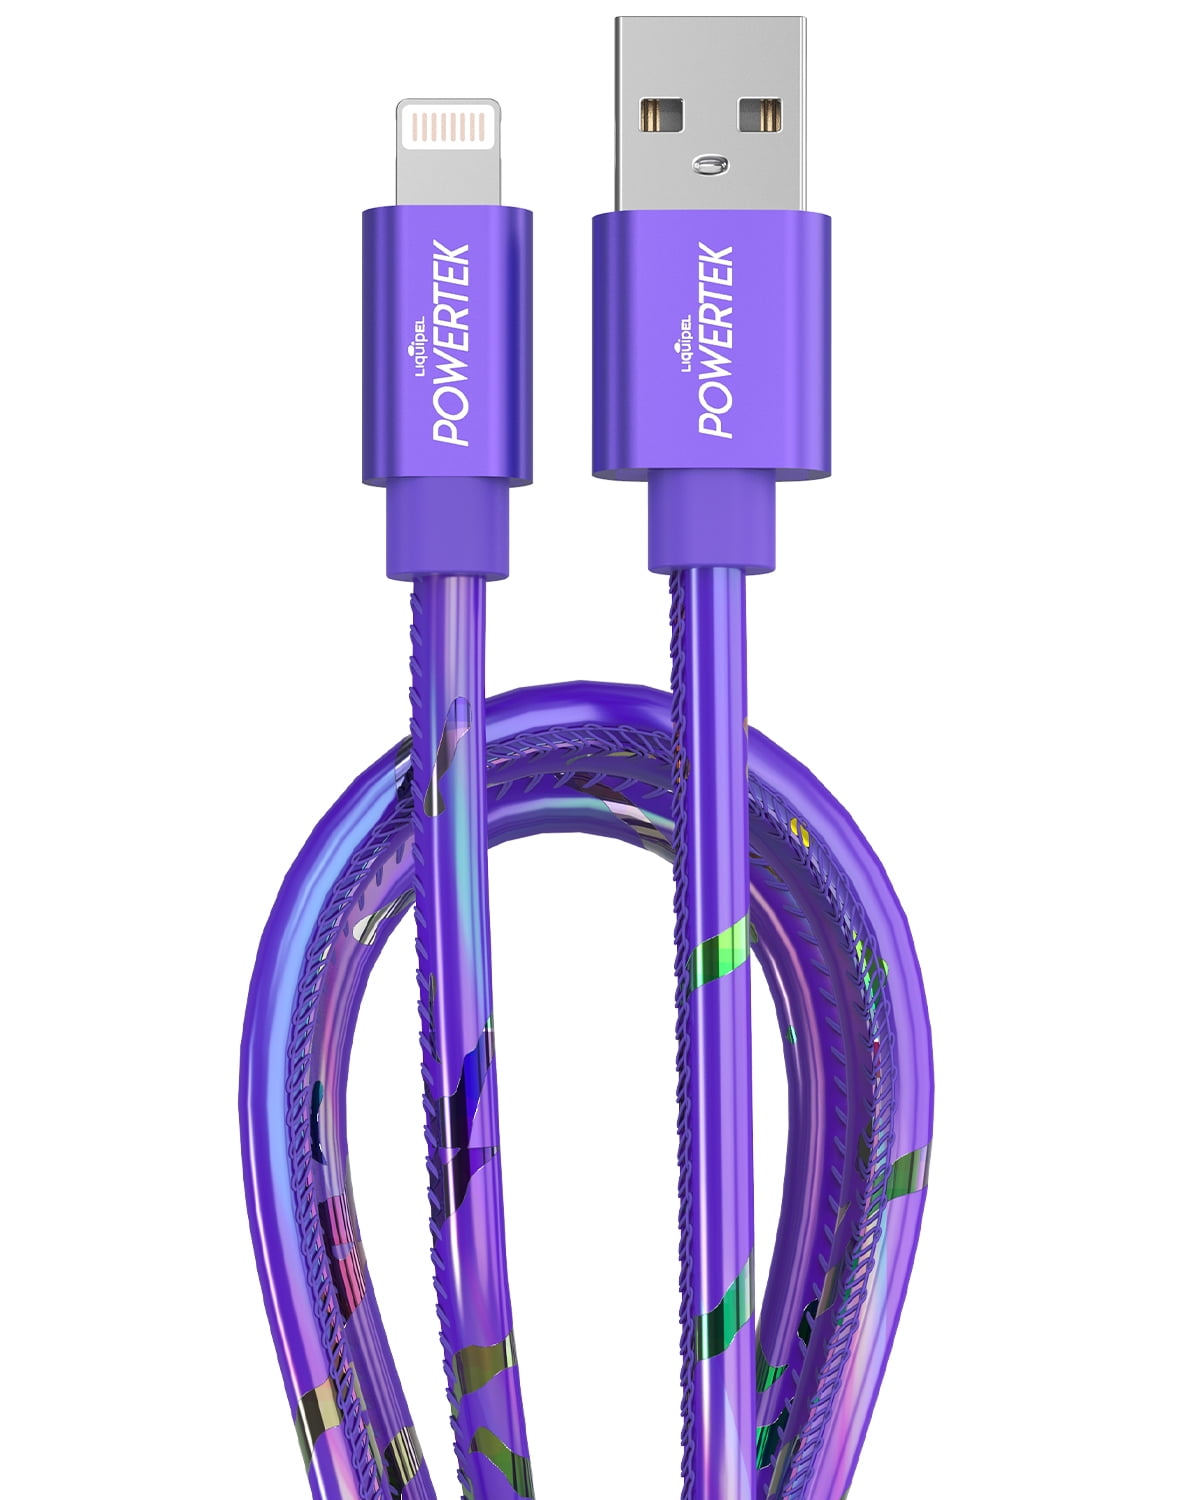 Liquipel Powertek iPad & iPhone Lightning Charger Cable, Fast Charging 6ft  MFI, Neon Party 